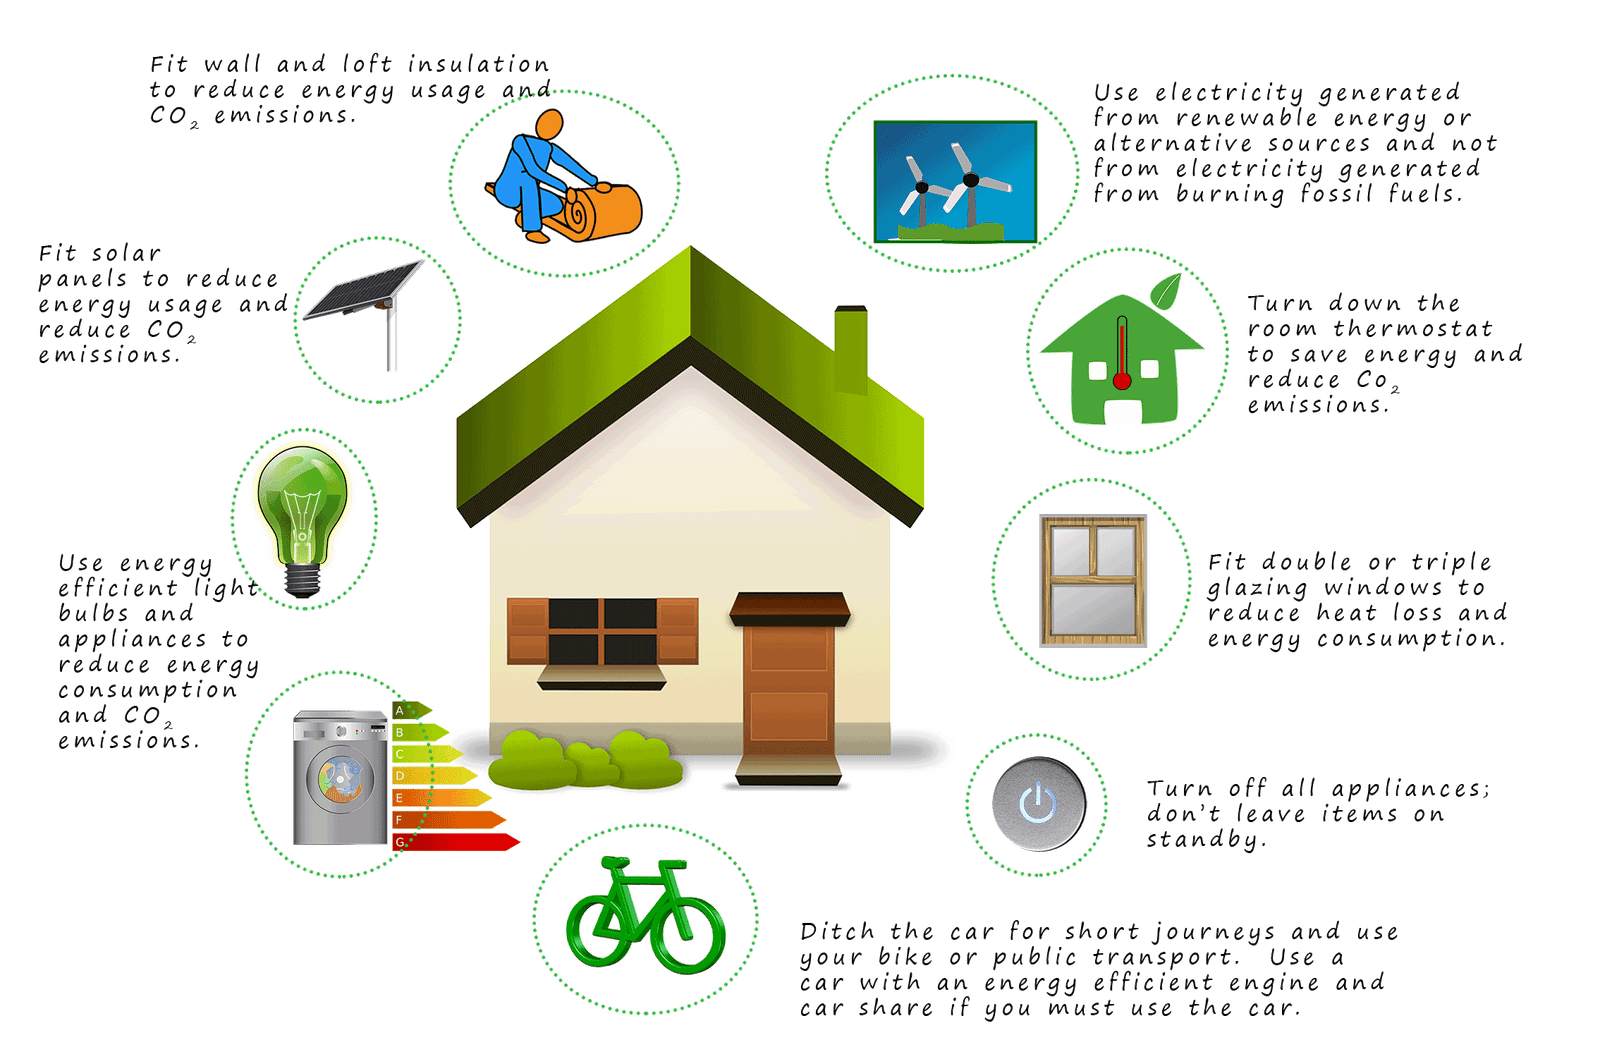 Examples of ways and methods to reduce the carbon foot print of homes and businesses.